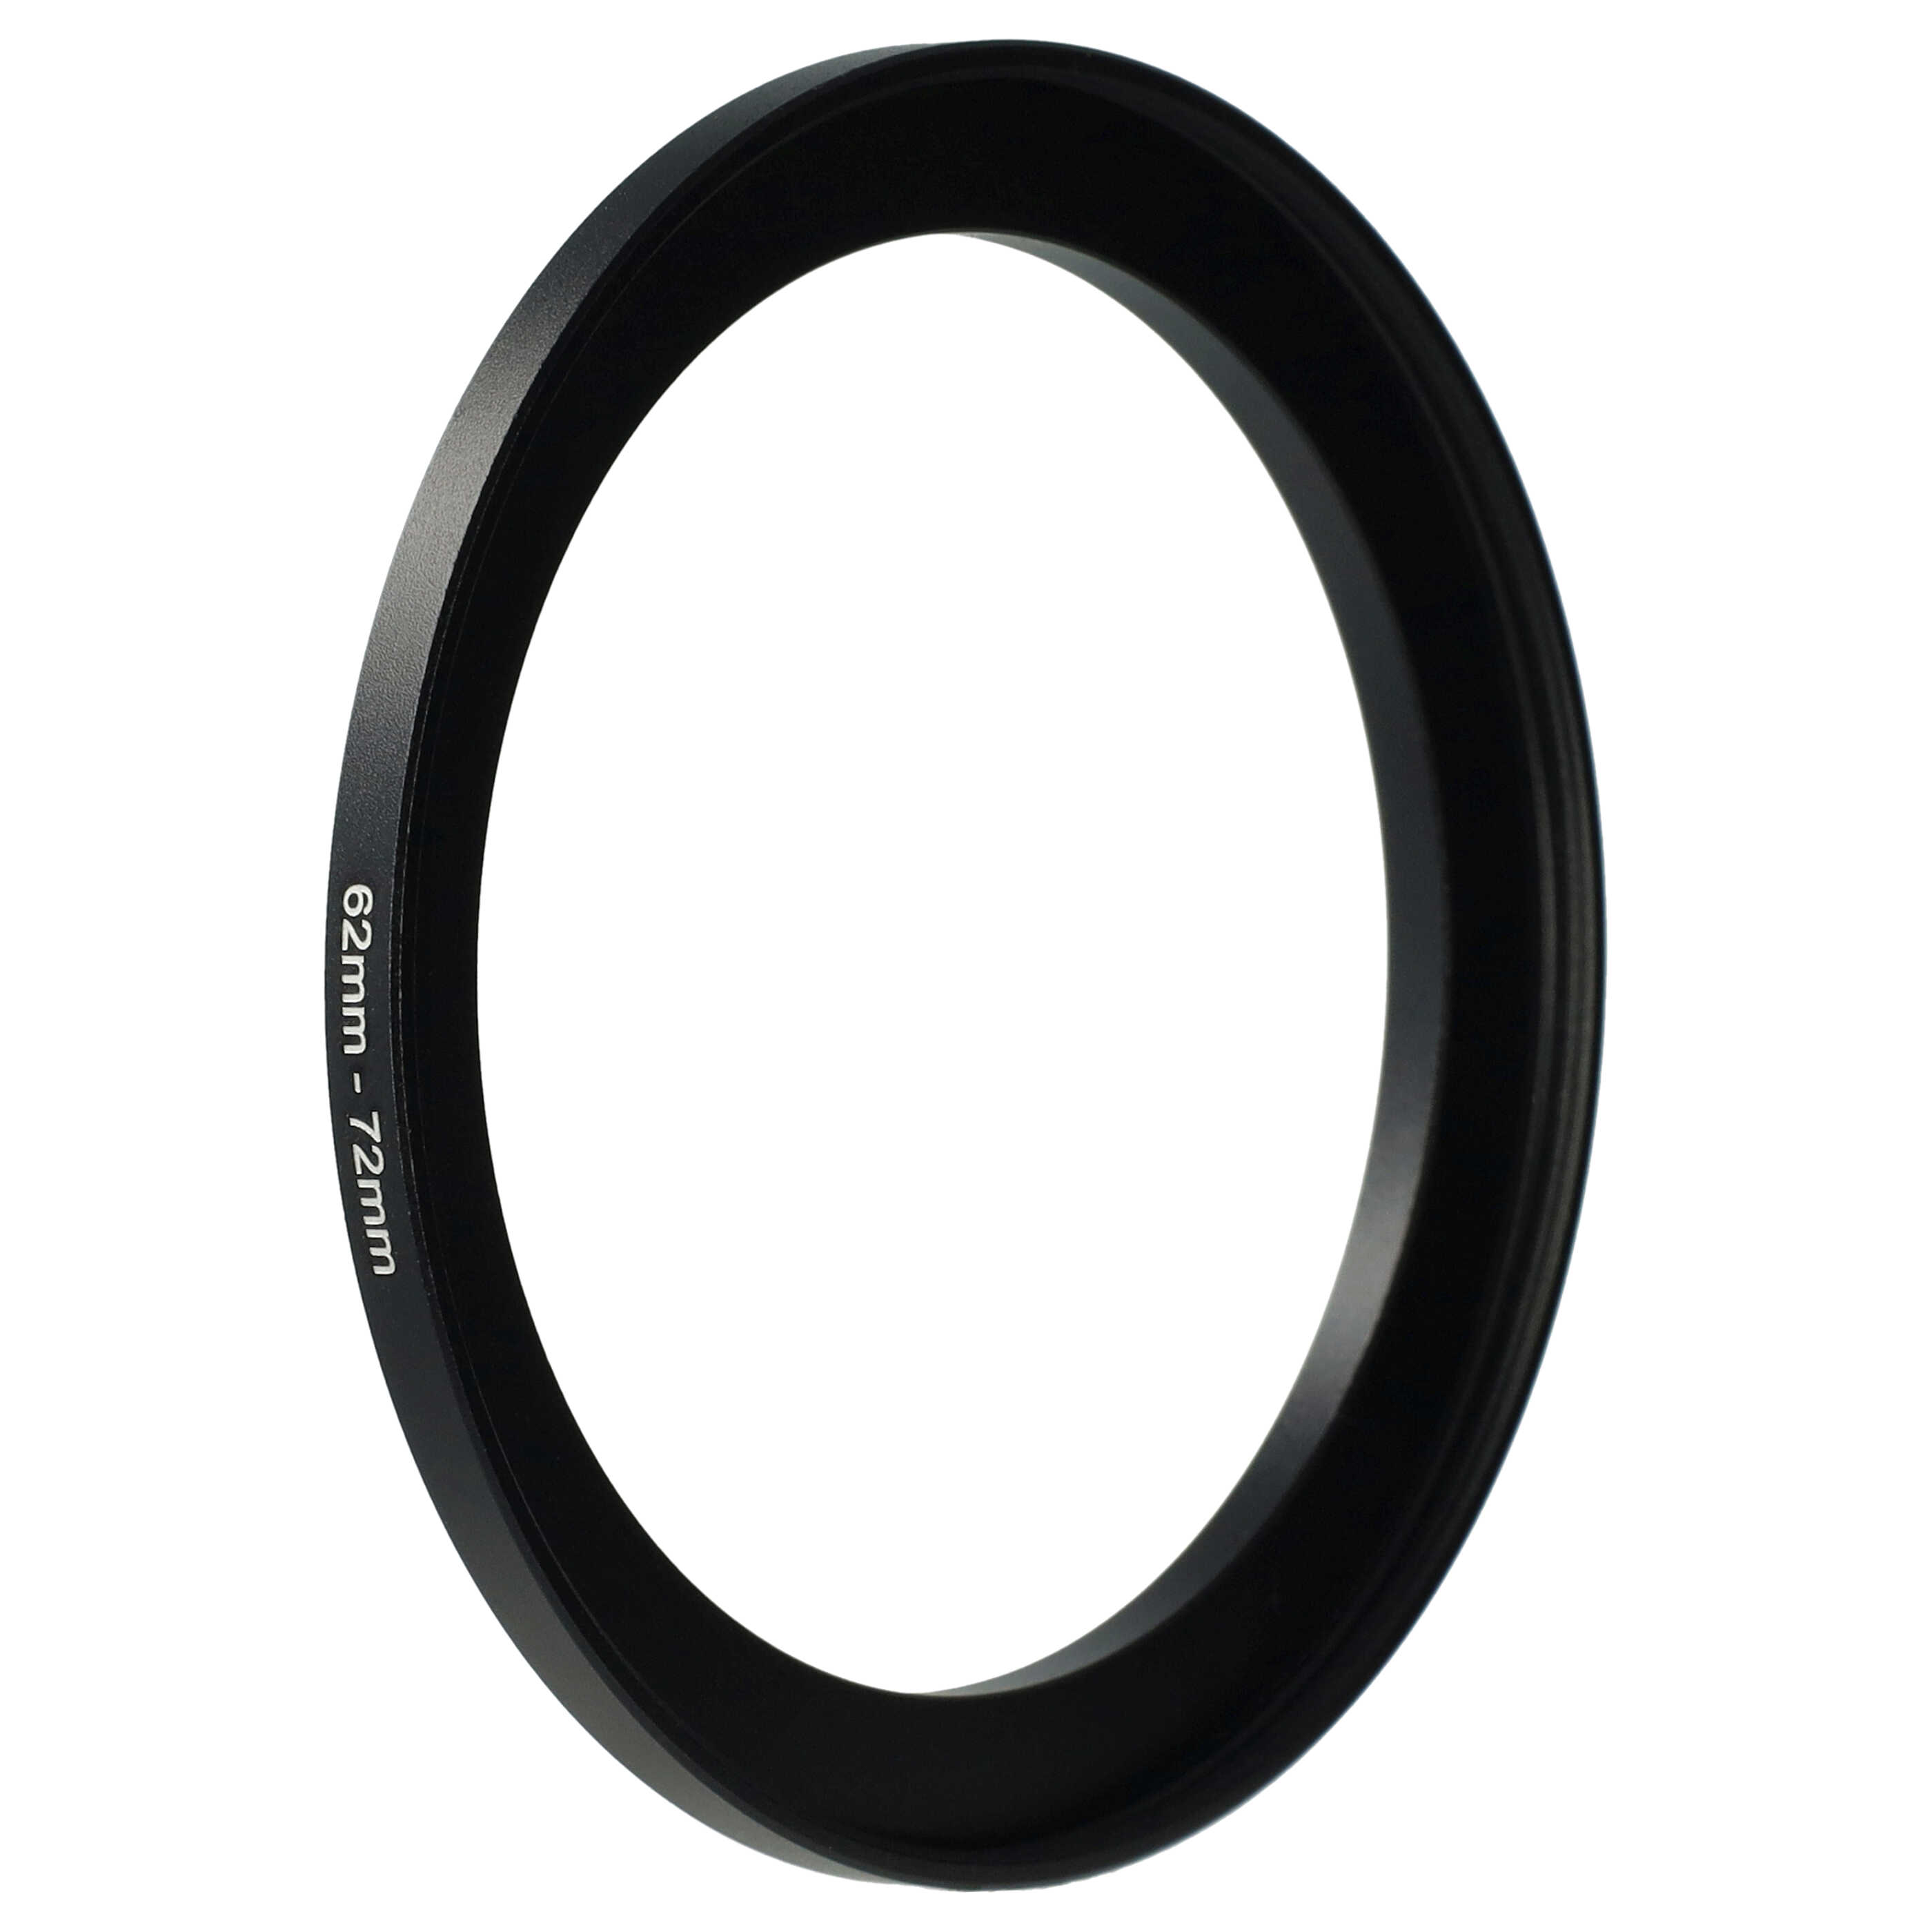 Step-Up Ring Adapter of 62 mm to 72 mmfor various Camera Lens - Filter Adapter